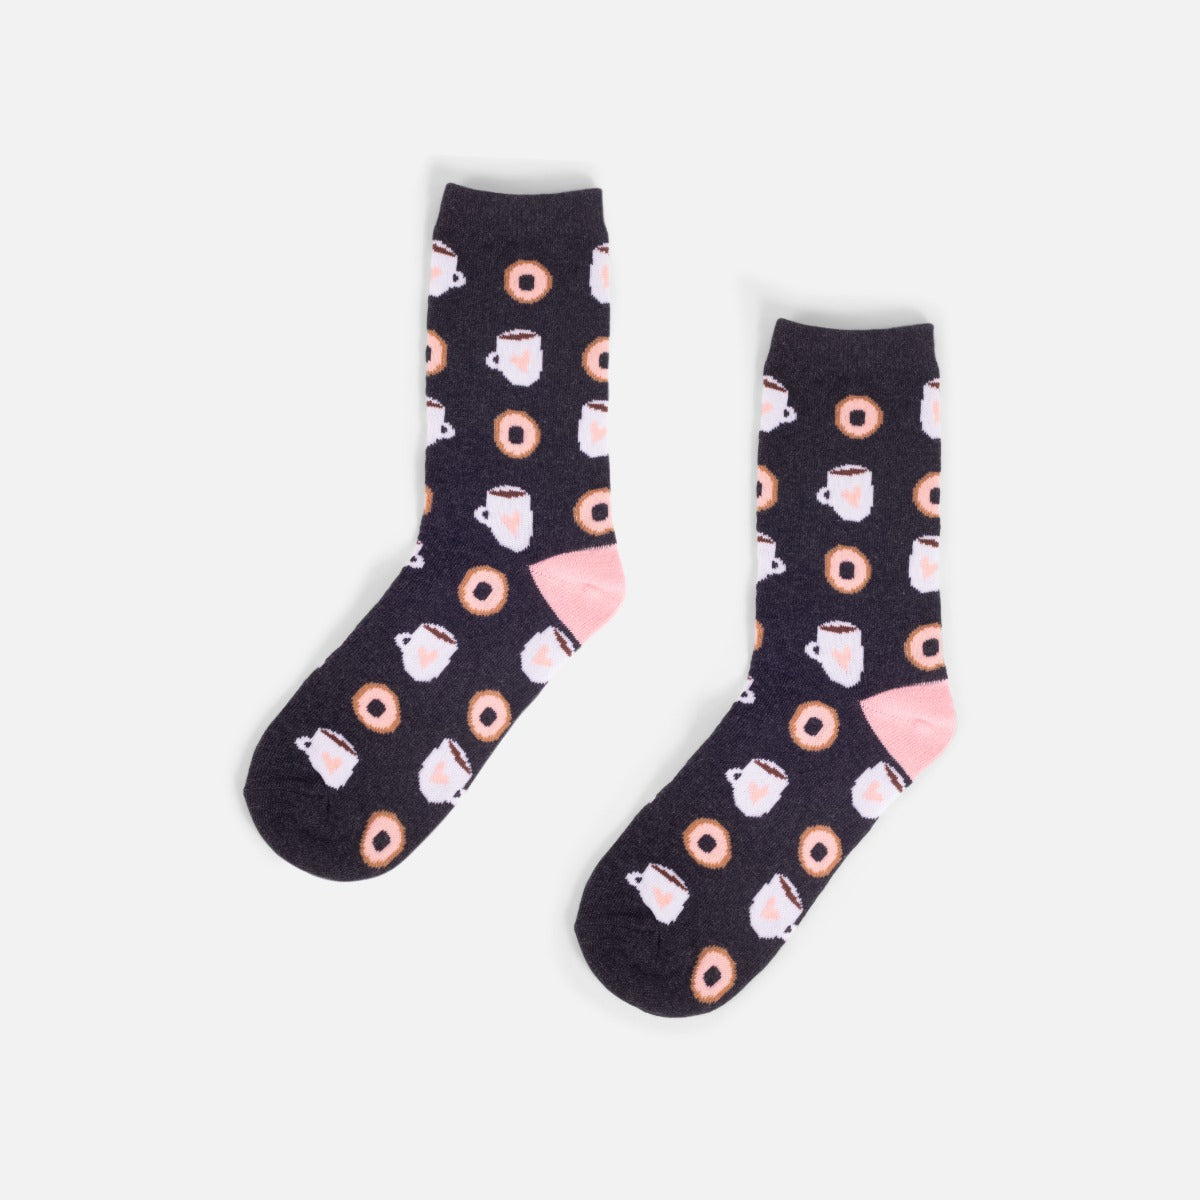 Black socks with coffee and donut prints